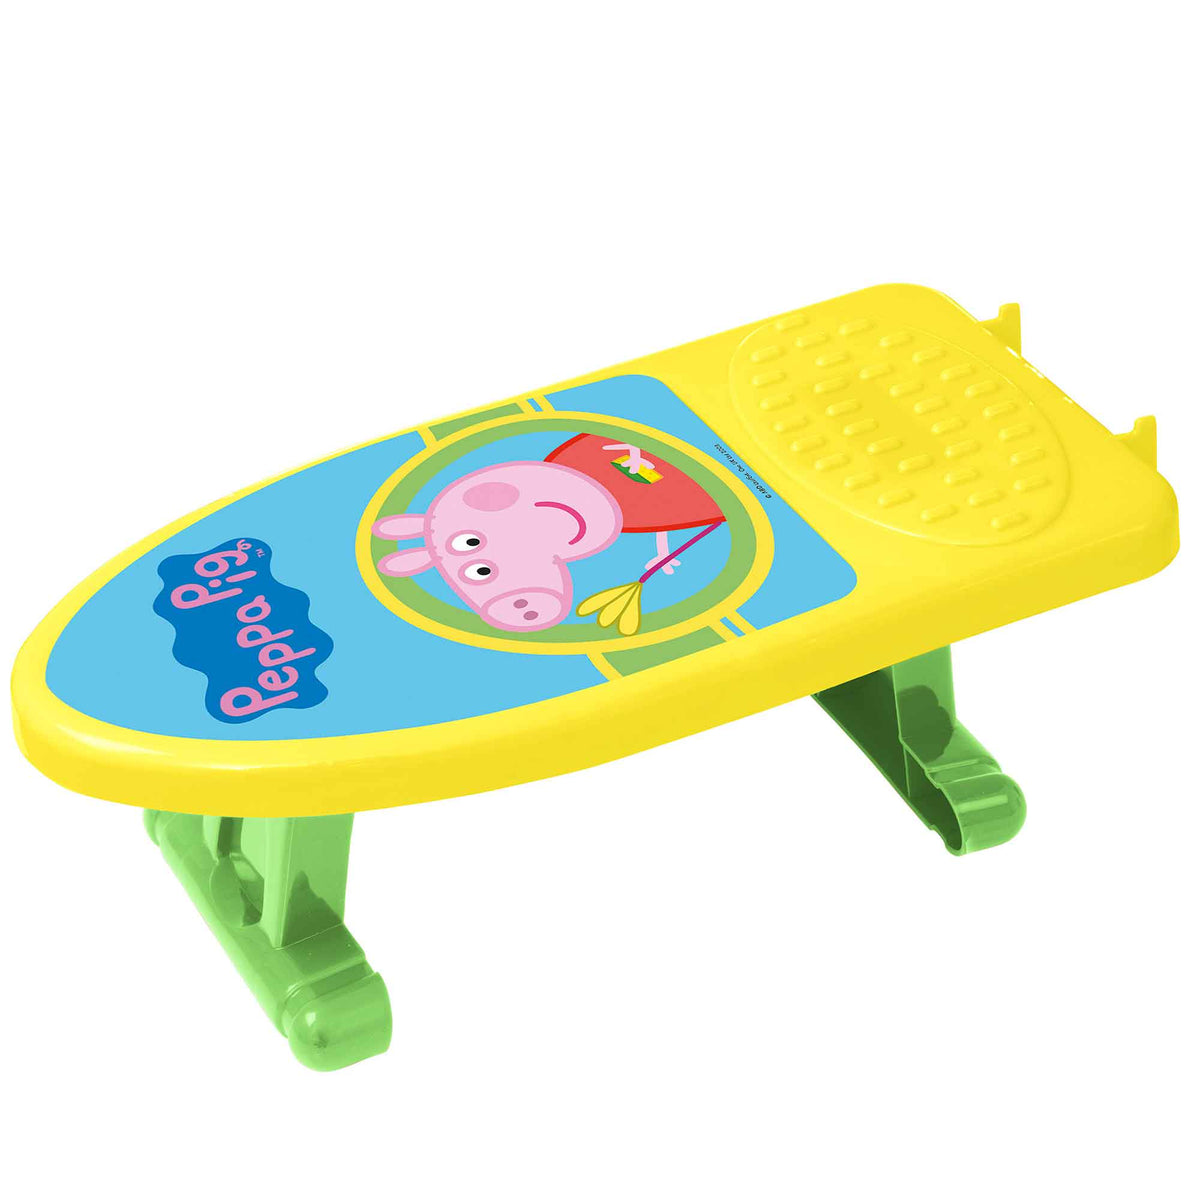 Peppa Pig Little Helper Set with Toy Iron &amp; Board